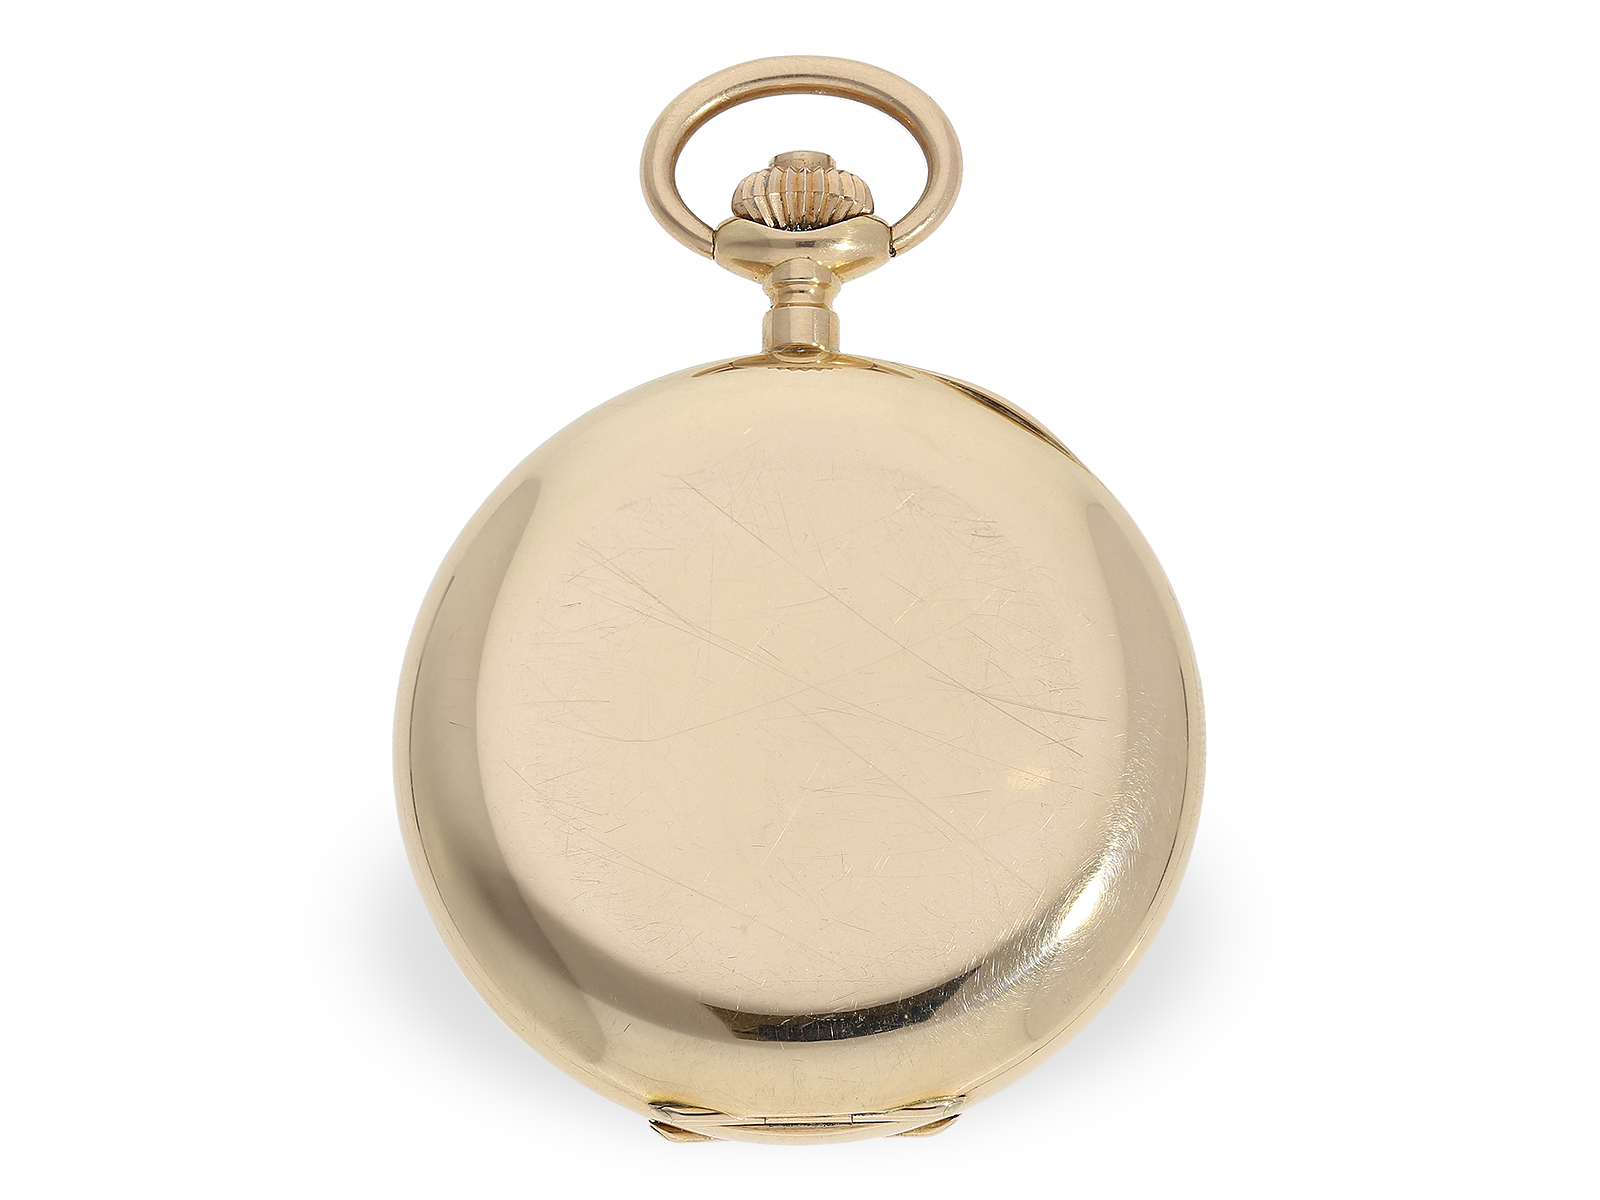 Very fine gold hunting case watch with chronometer escapement, "Chronometre Geneve", ca. 1900 - Image 8 of 8